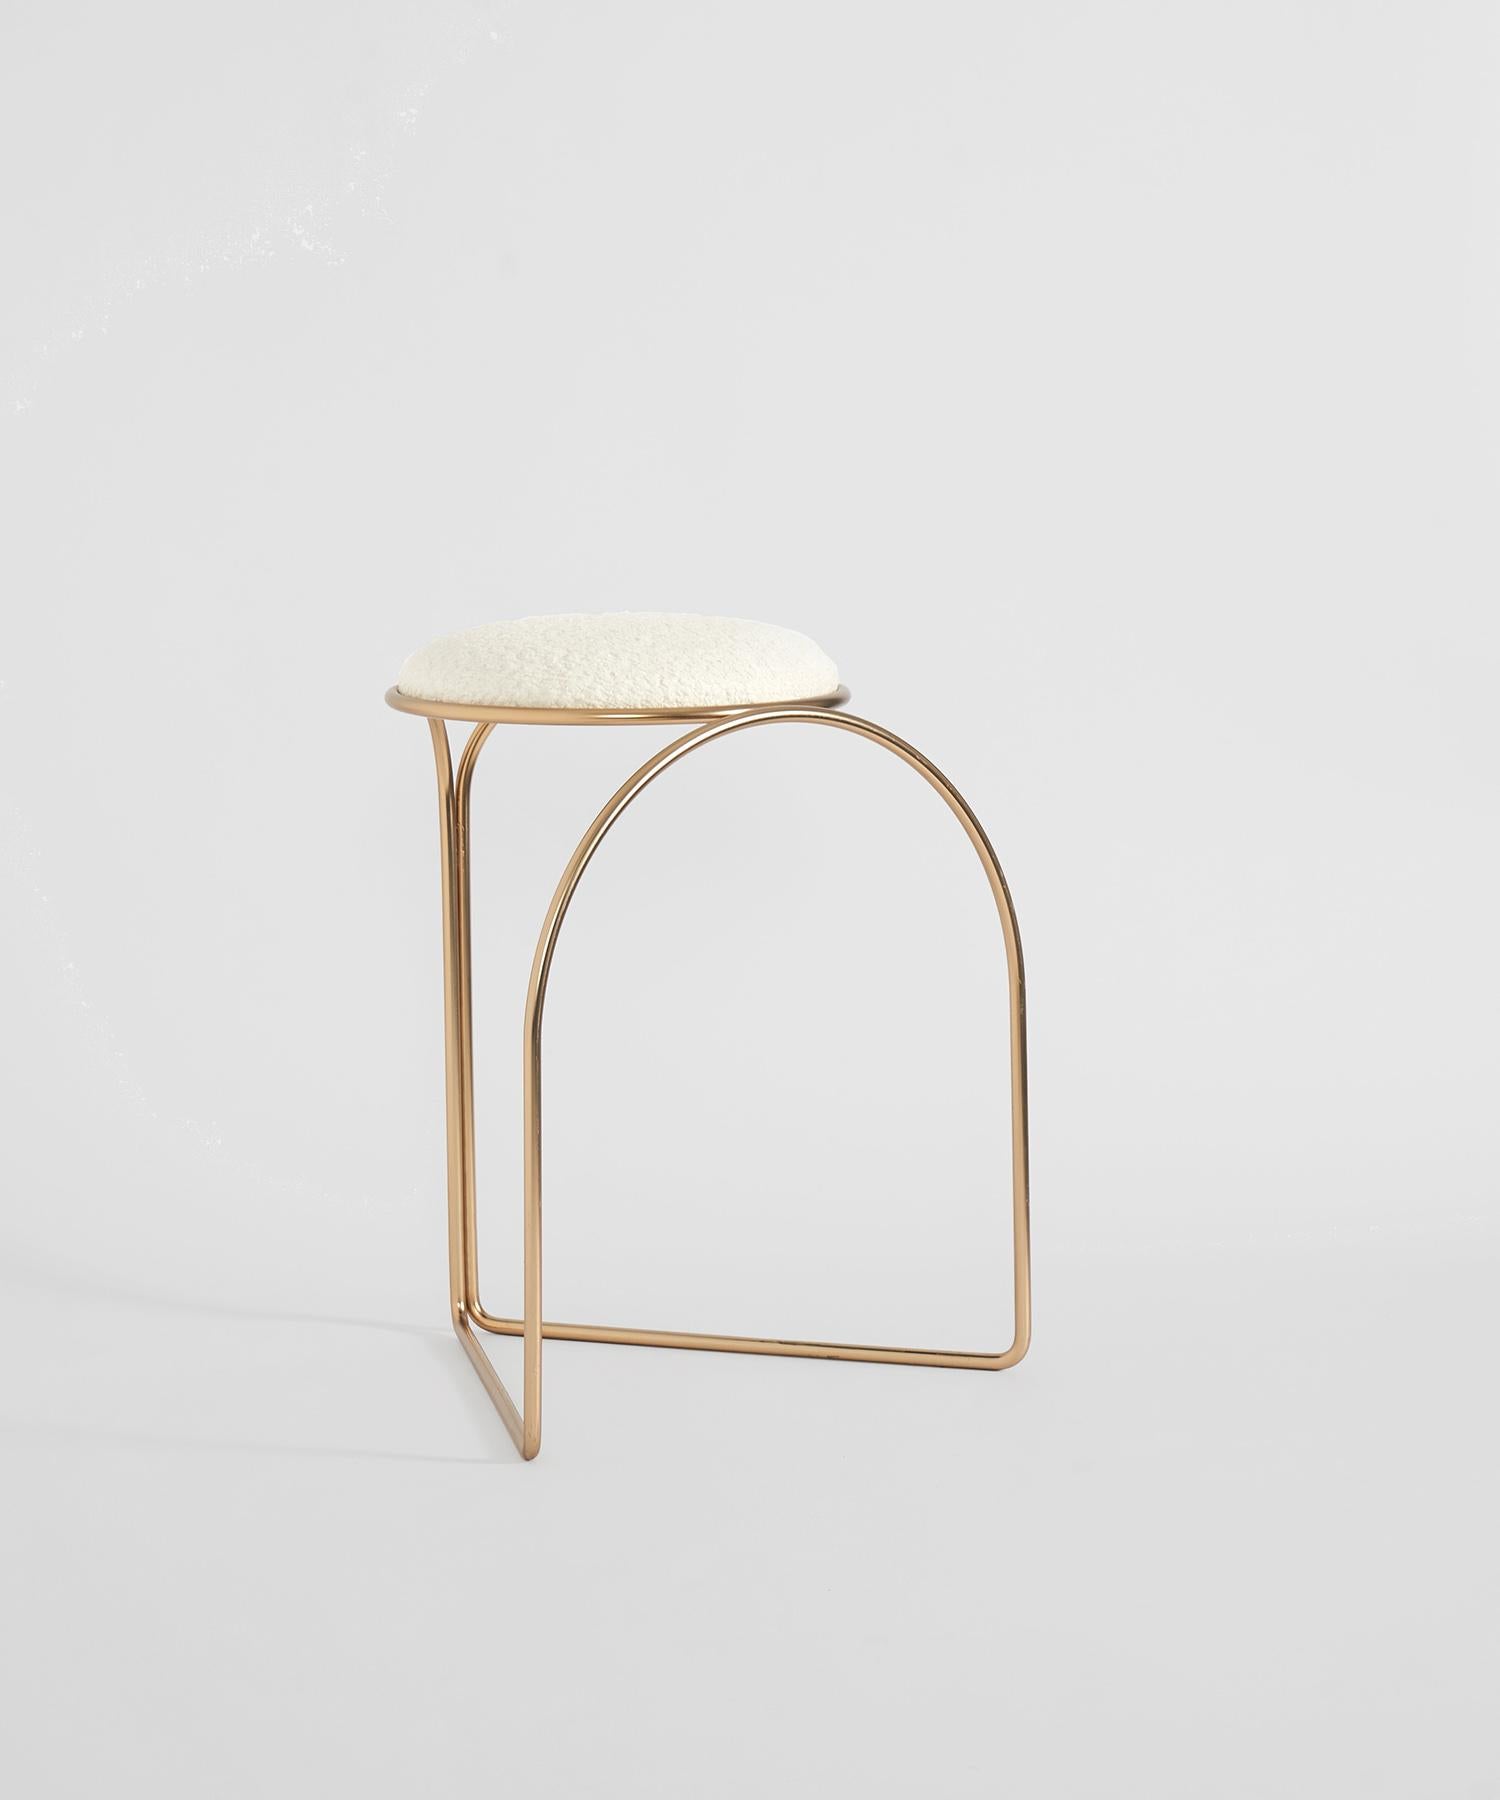 Flow low stool matt or light gold are made by an element, a continuous wire drawing geometries born from the projection of a circle on a triangle, in which the rigour of the continuous lines plays with the circular shapes that embrace the padding